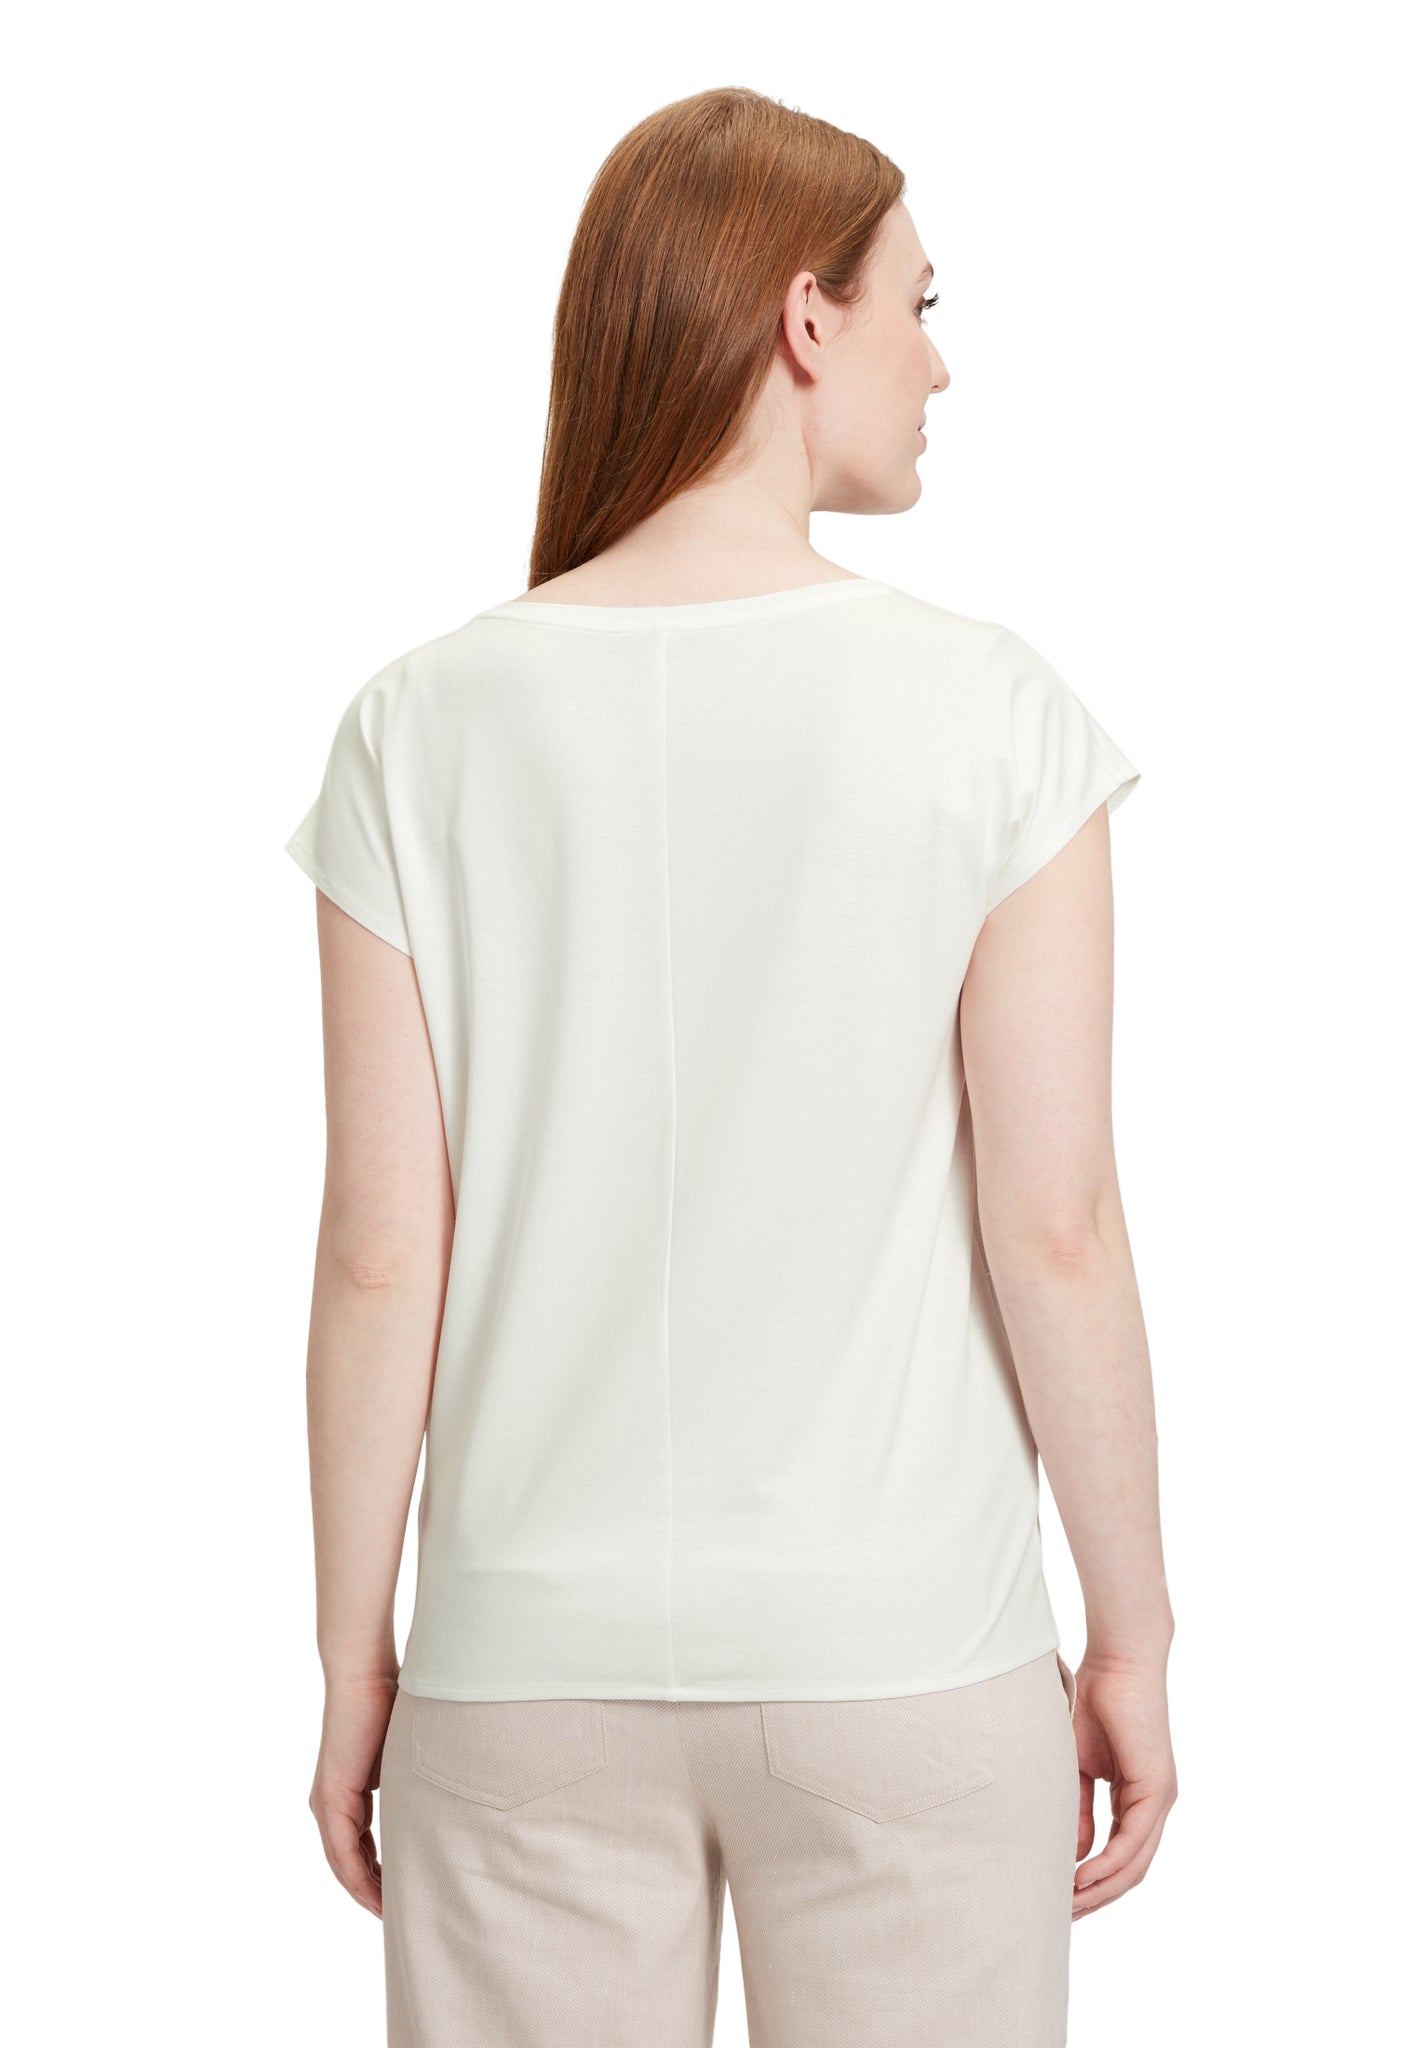 Betty & Co different textured block stripe tshirt in white

Product code 2061/3270